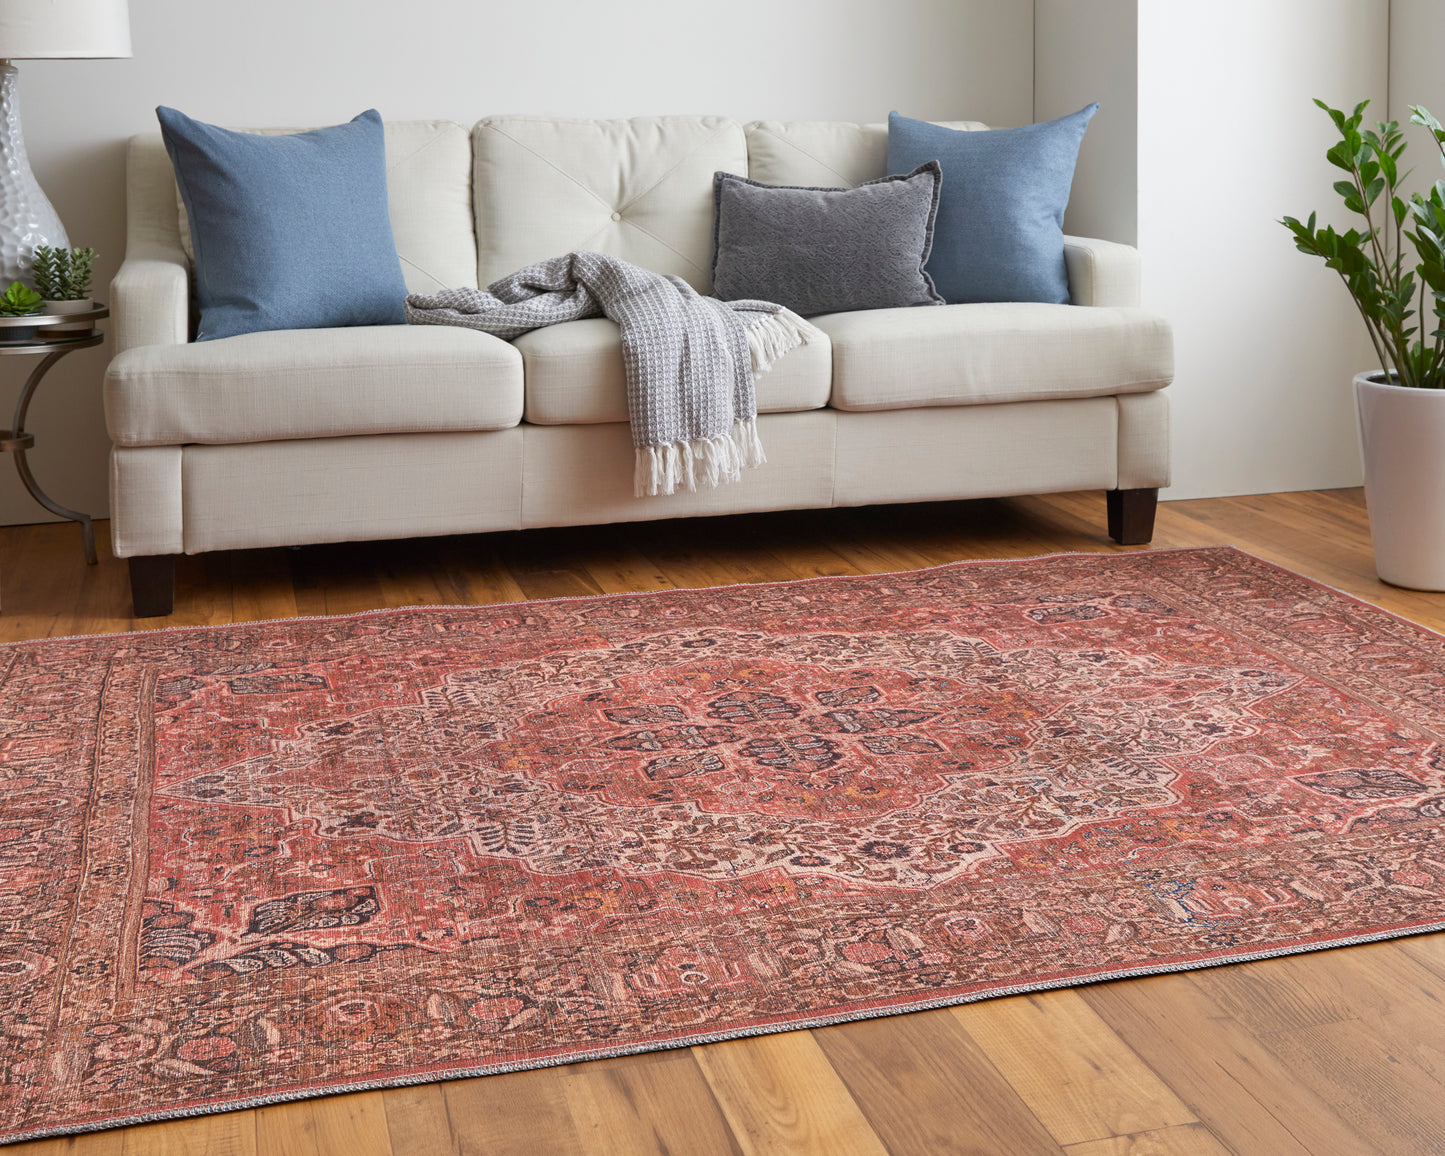 Rawlins 39HNF Power Loomed Synthetic Blend Indoor Area Rug by Feizy Rugs